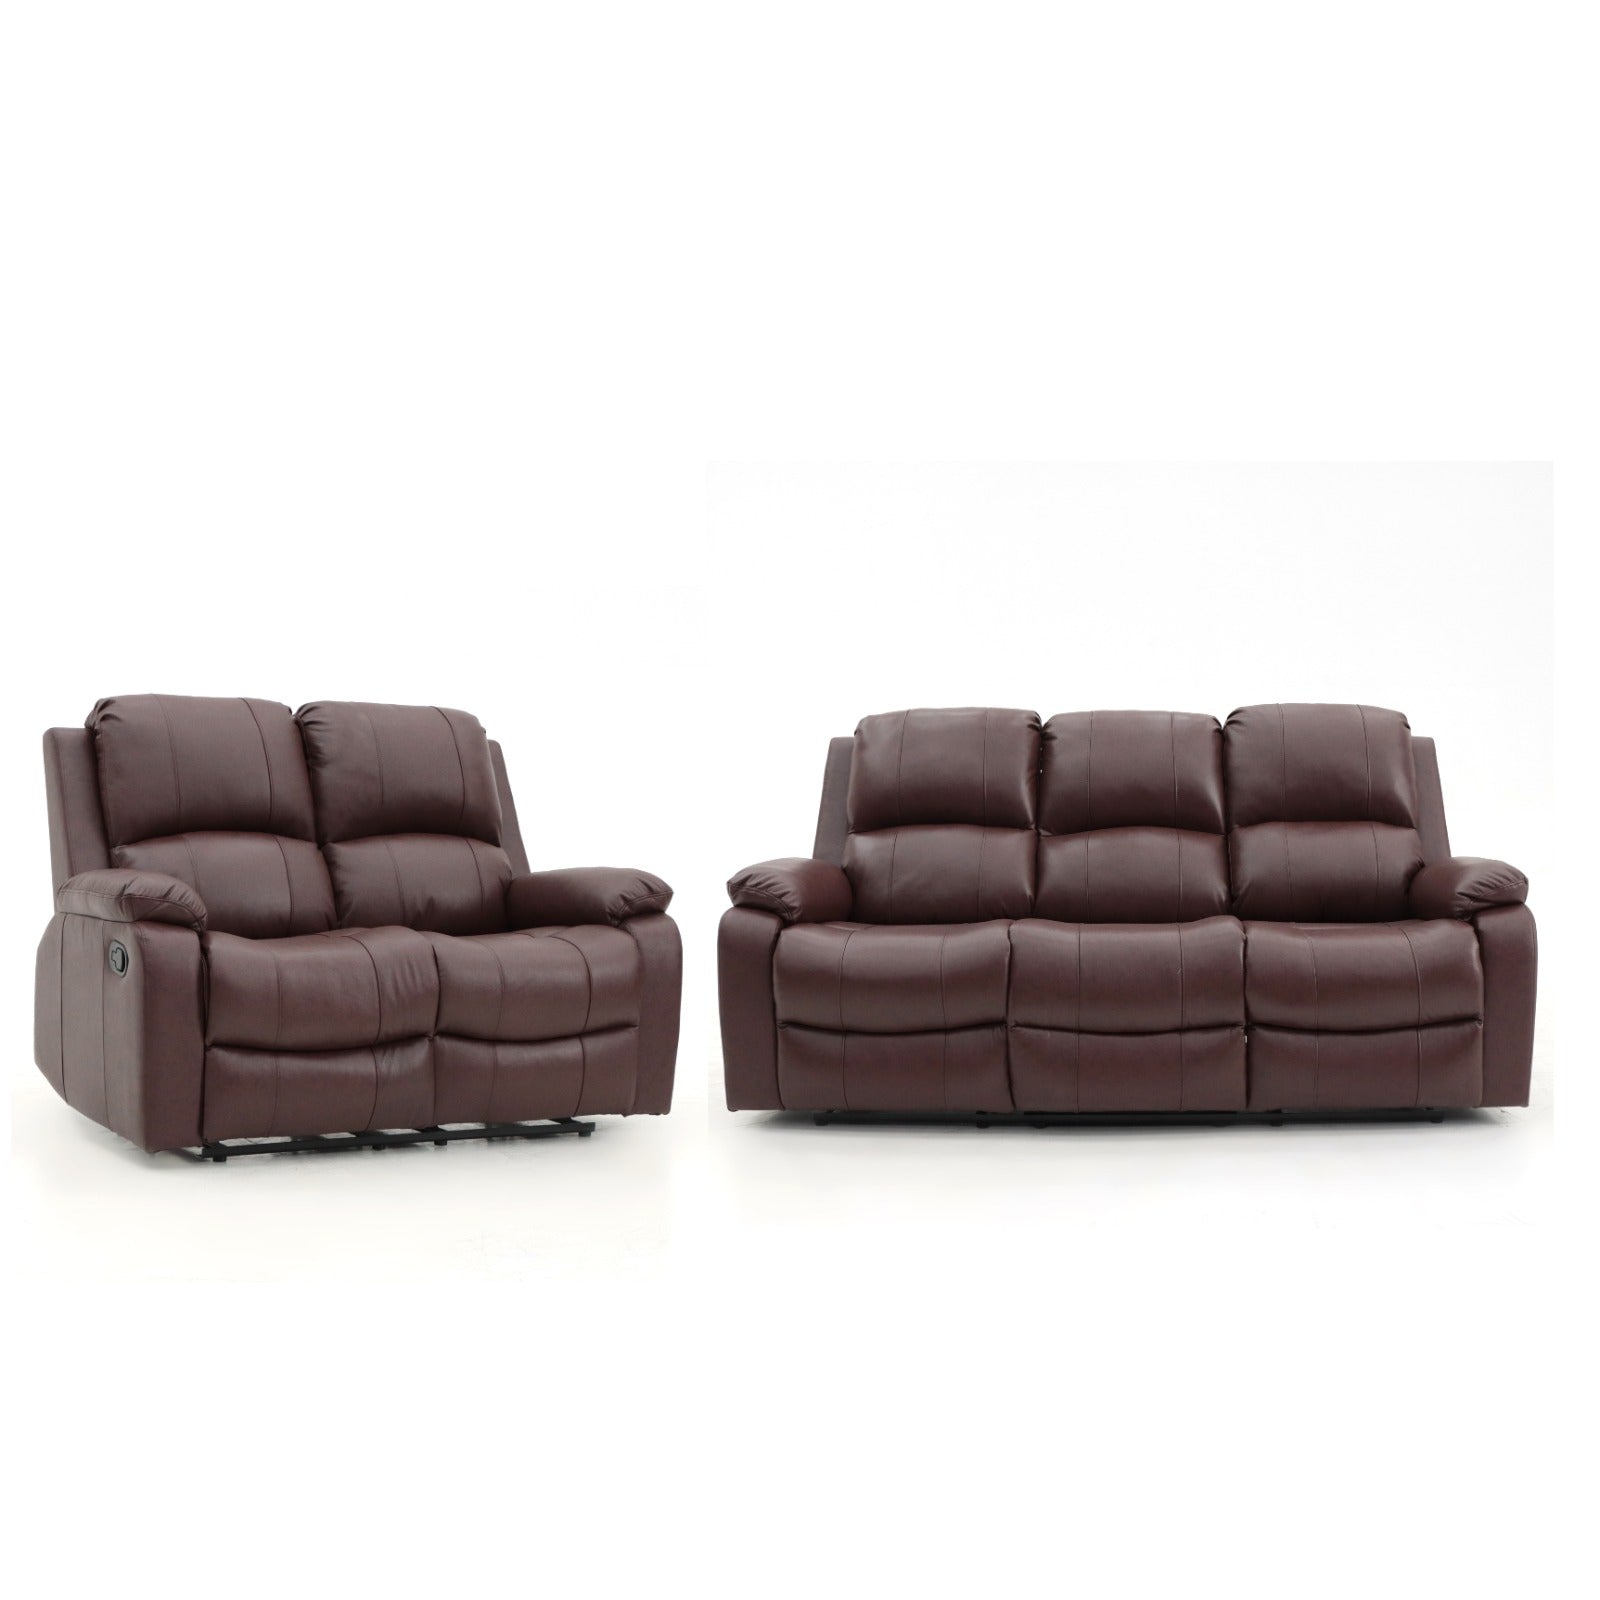 Aston 3 Seater and 2 Seater Manual Recliner Chesnut Leather